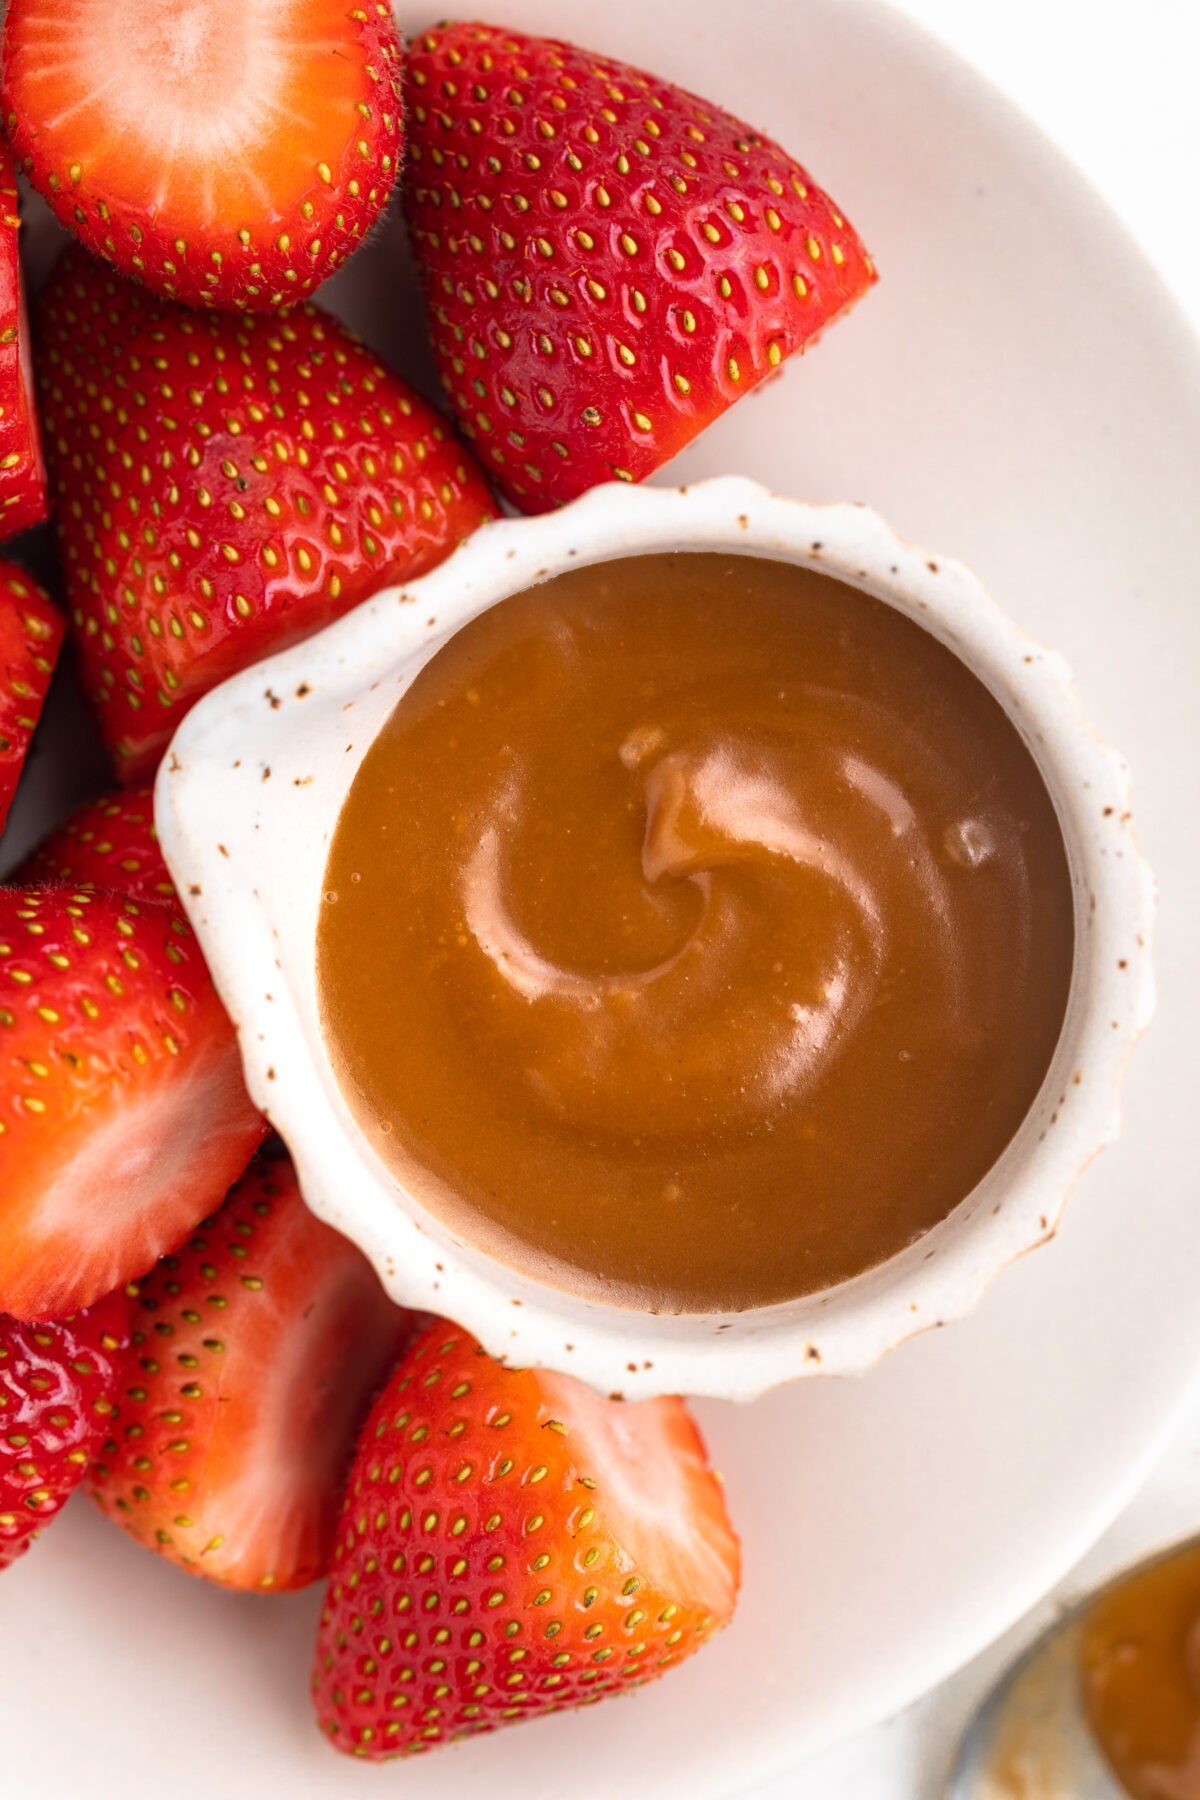 Overhead look at a small ramekin of keto caramel sauce on a plate next to sliced bright red strawberries.